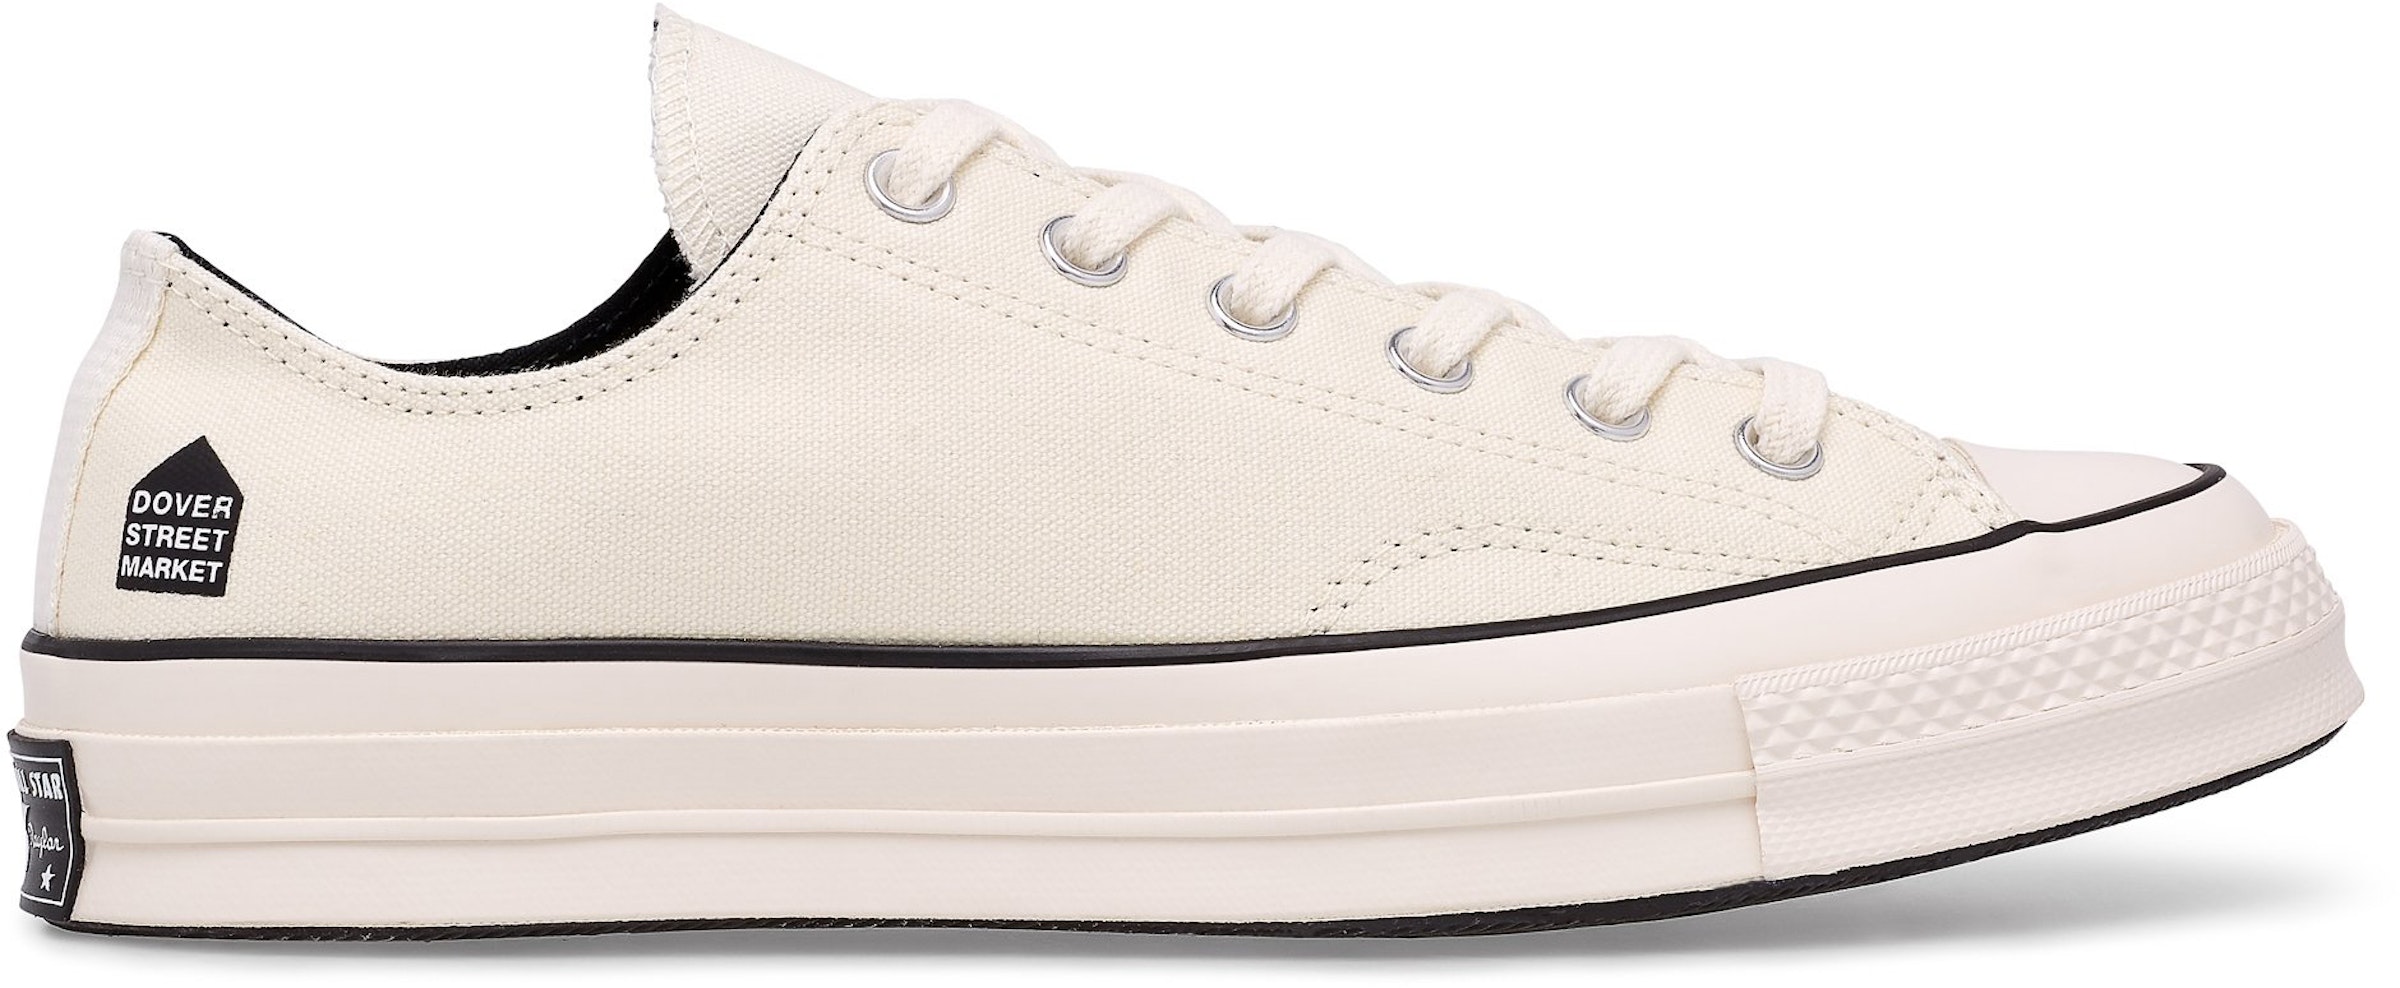 Sky Mew Mew dette Converse Chuck Taylor All-Star 70 Ox Dover Street Market Egret White -  163042C - US